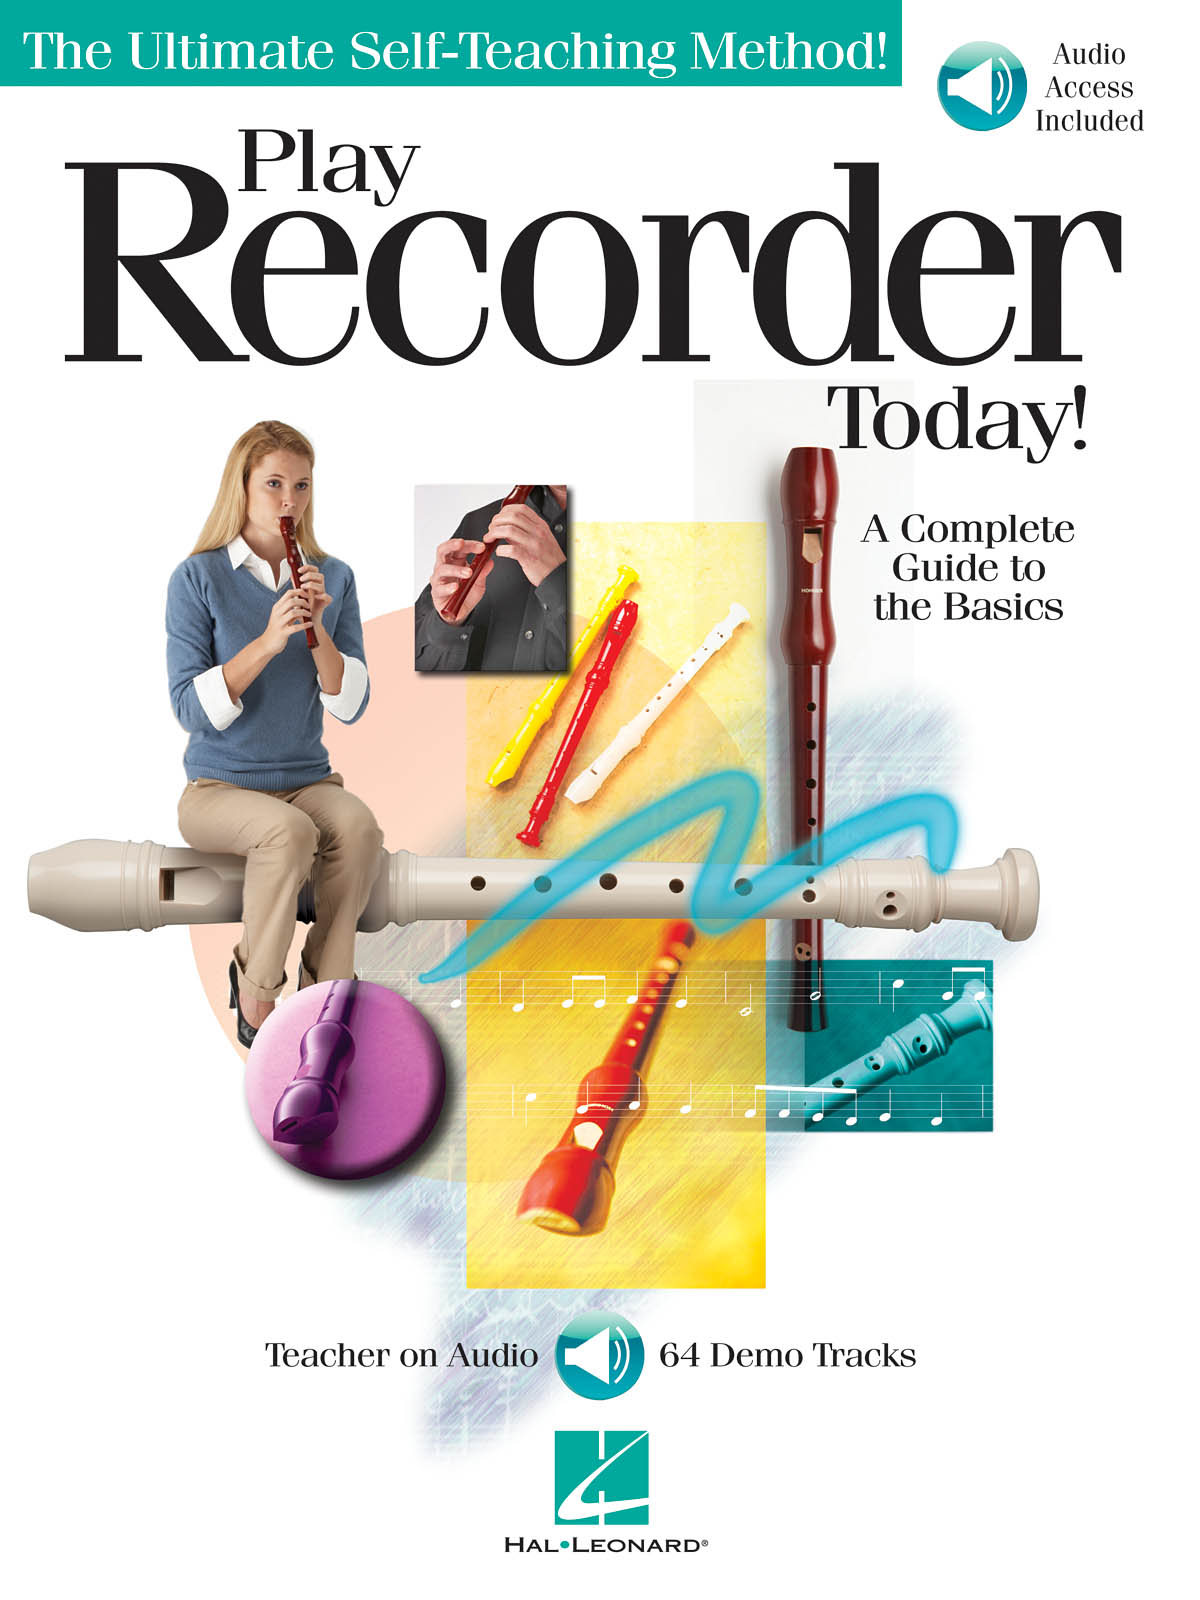 Play Recorder Today! - A Complete Guide To The Basics - na zobcovou flétnu